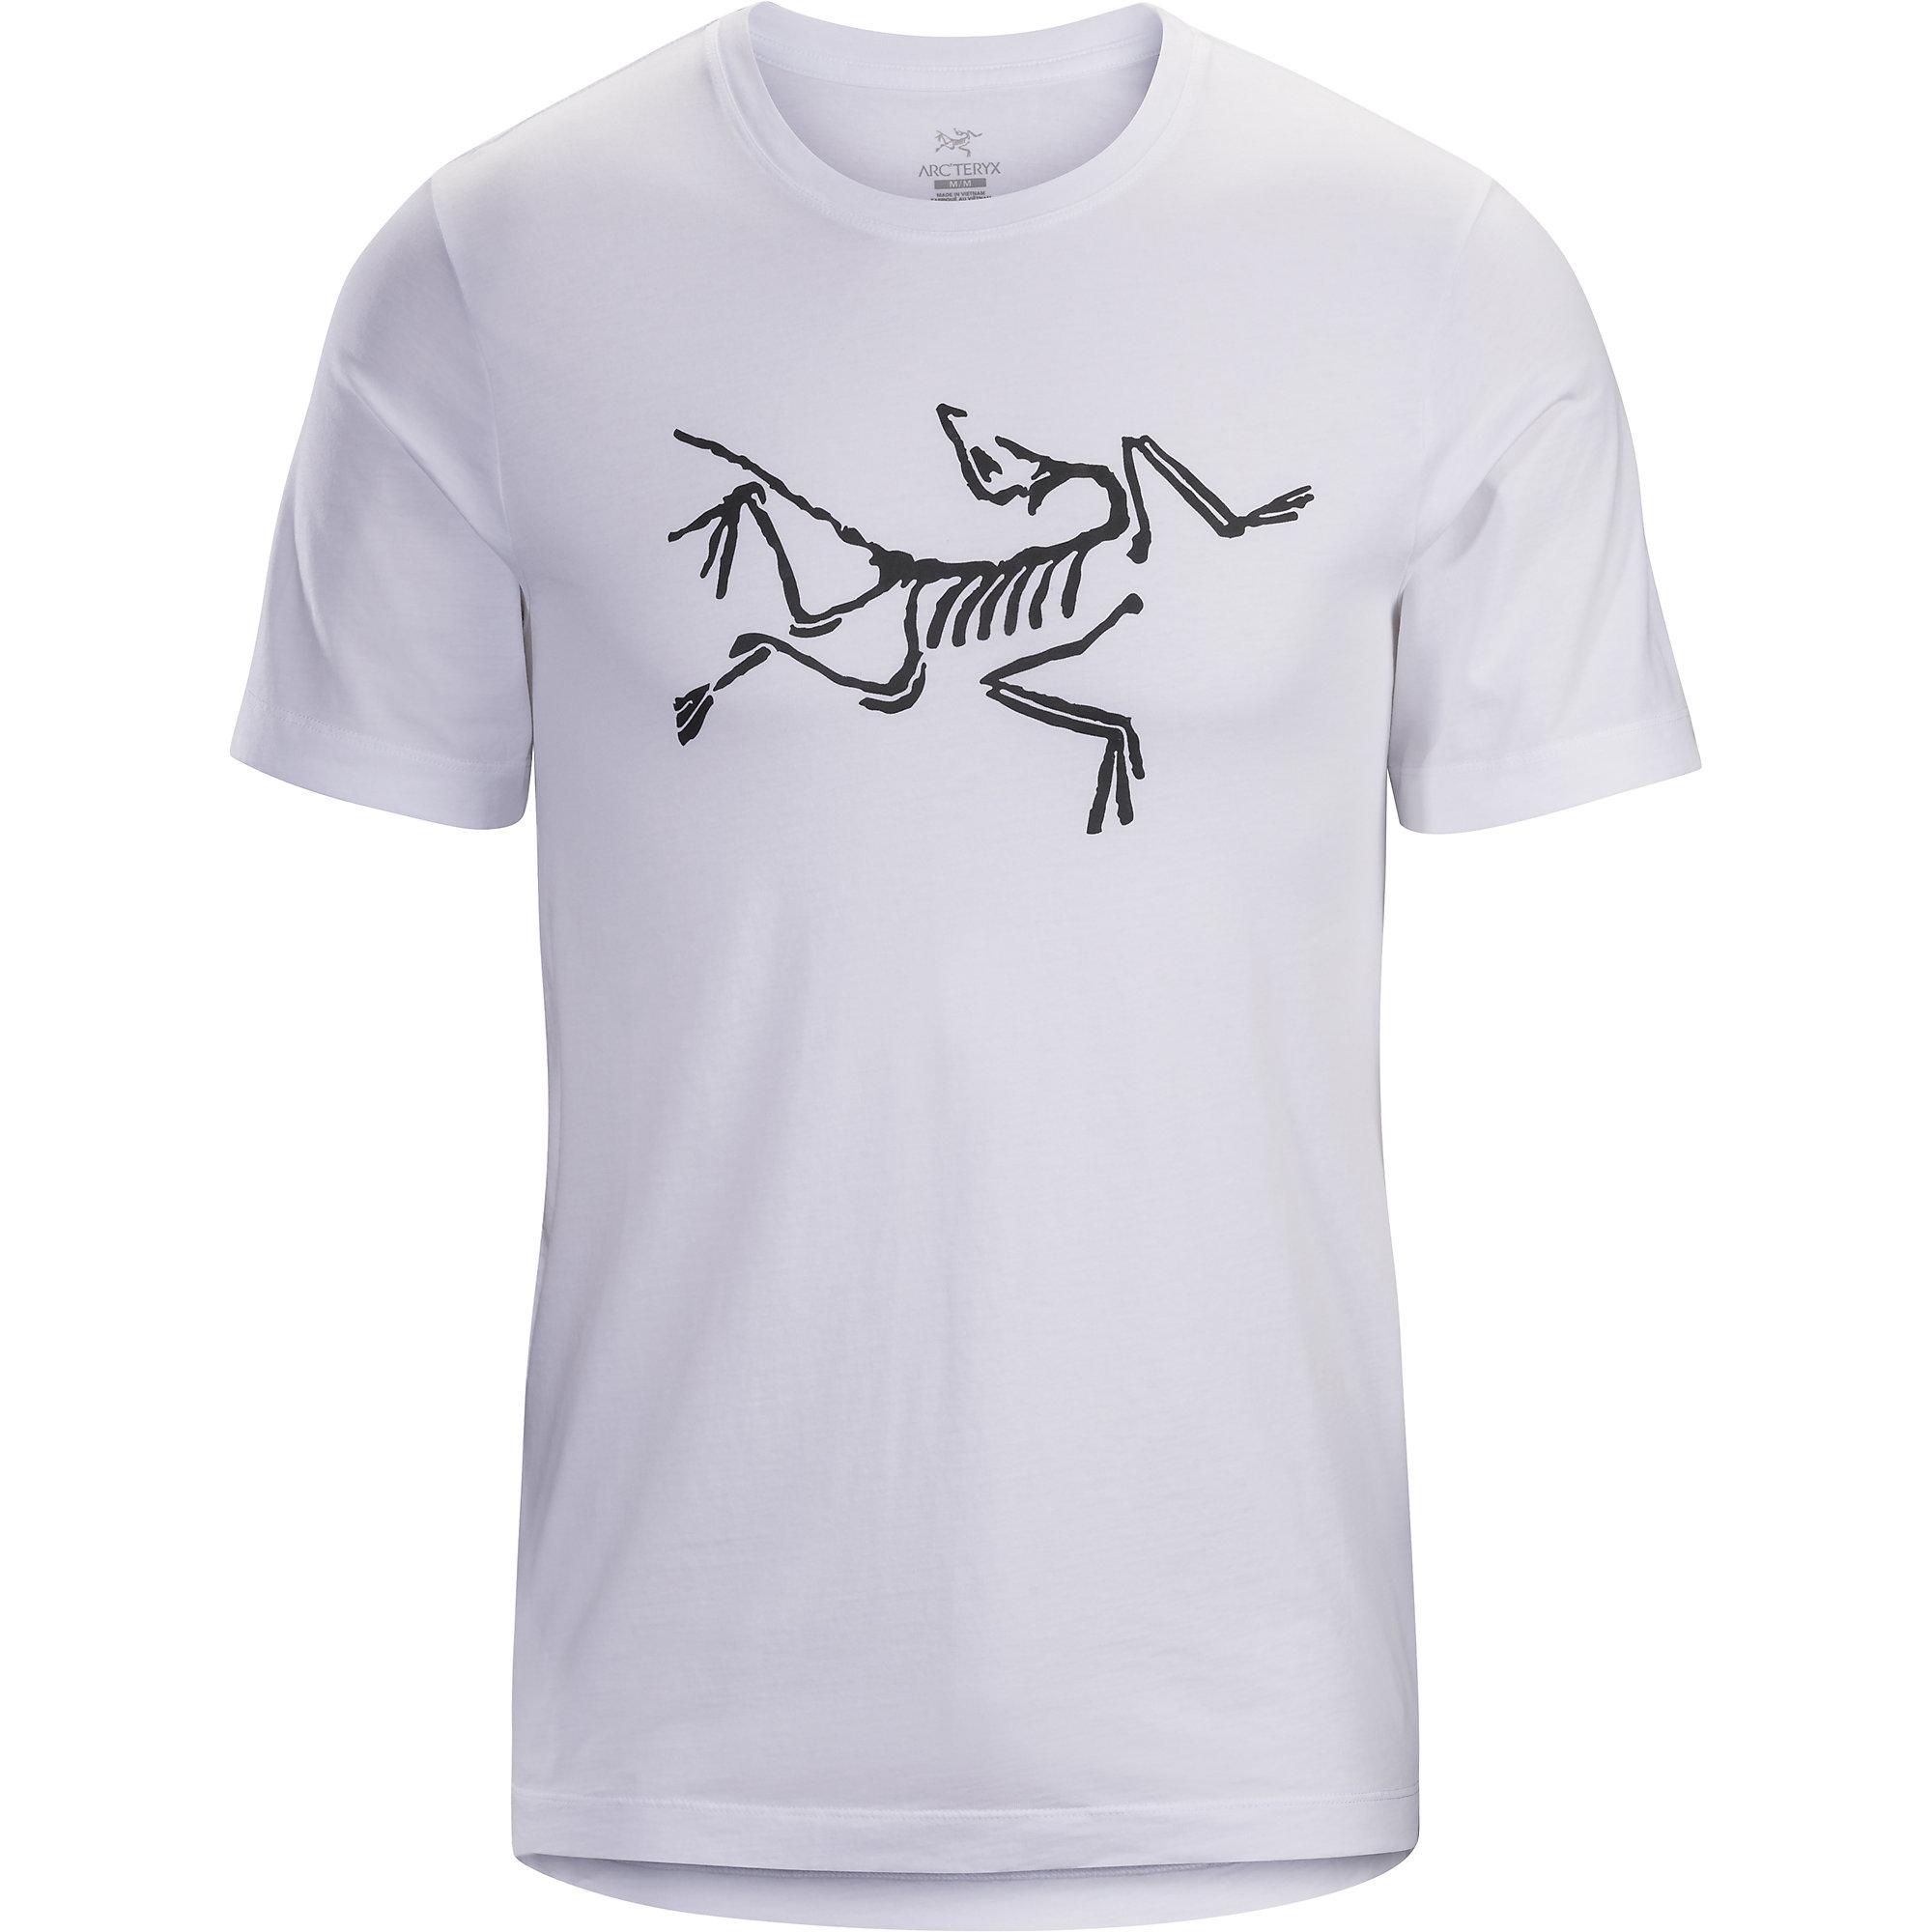 Arc'teryx Archaeopteryx Ss T-shirt in White for Men - Lyst